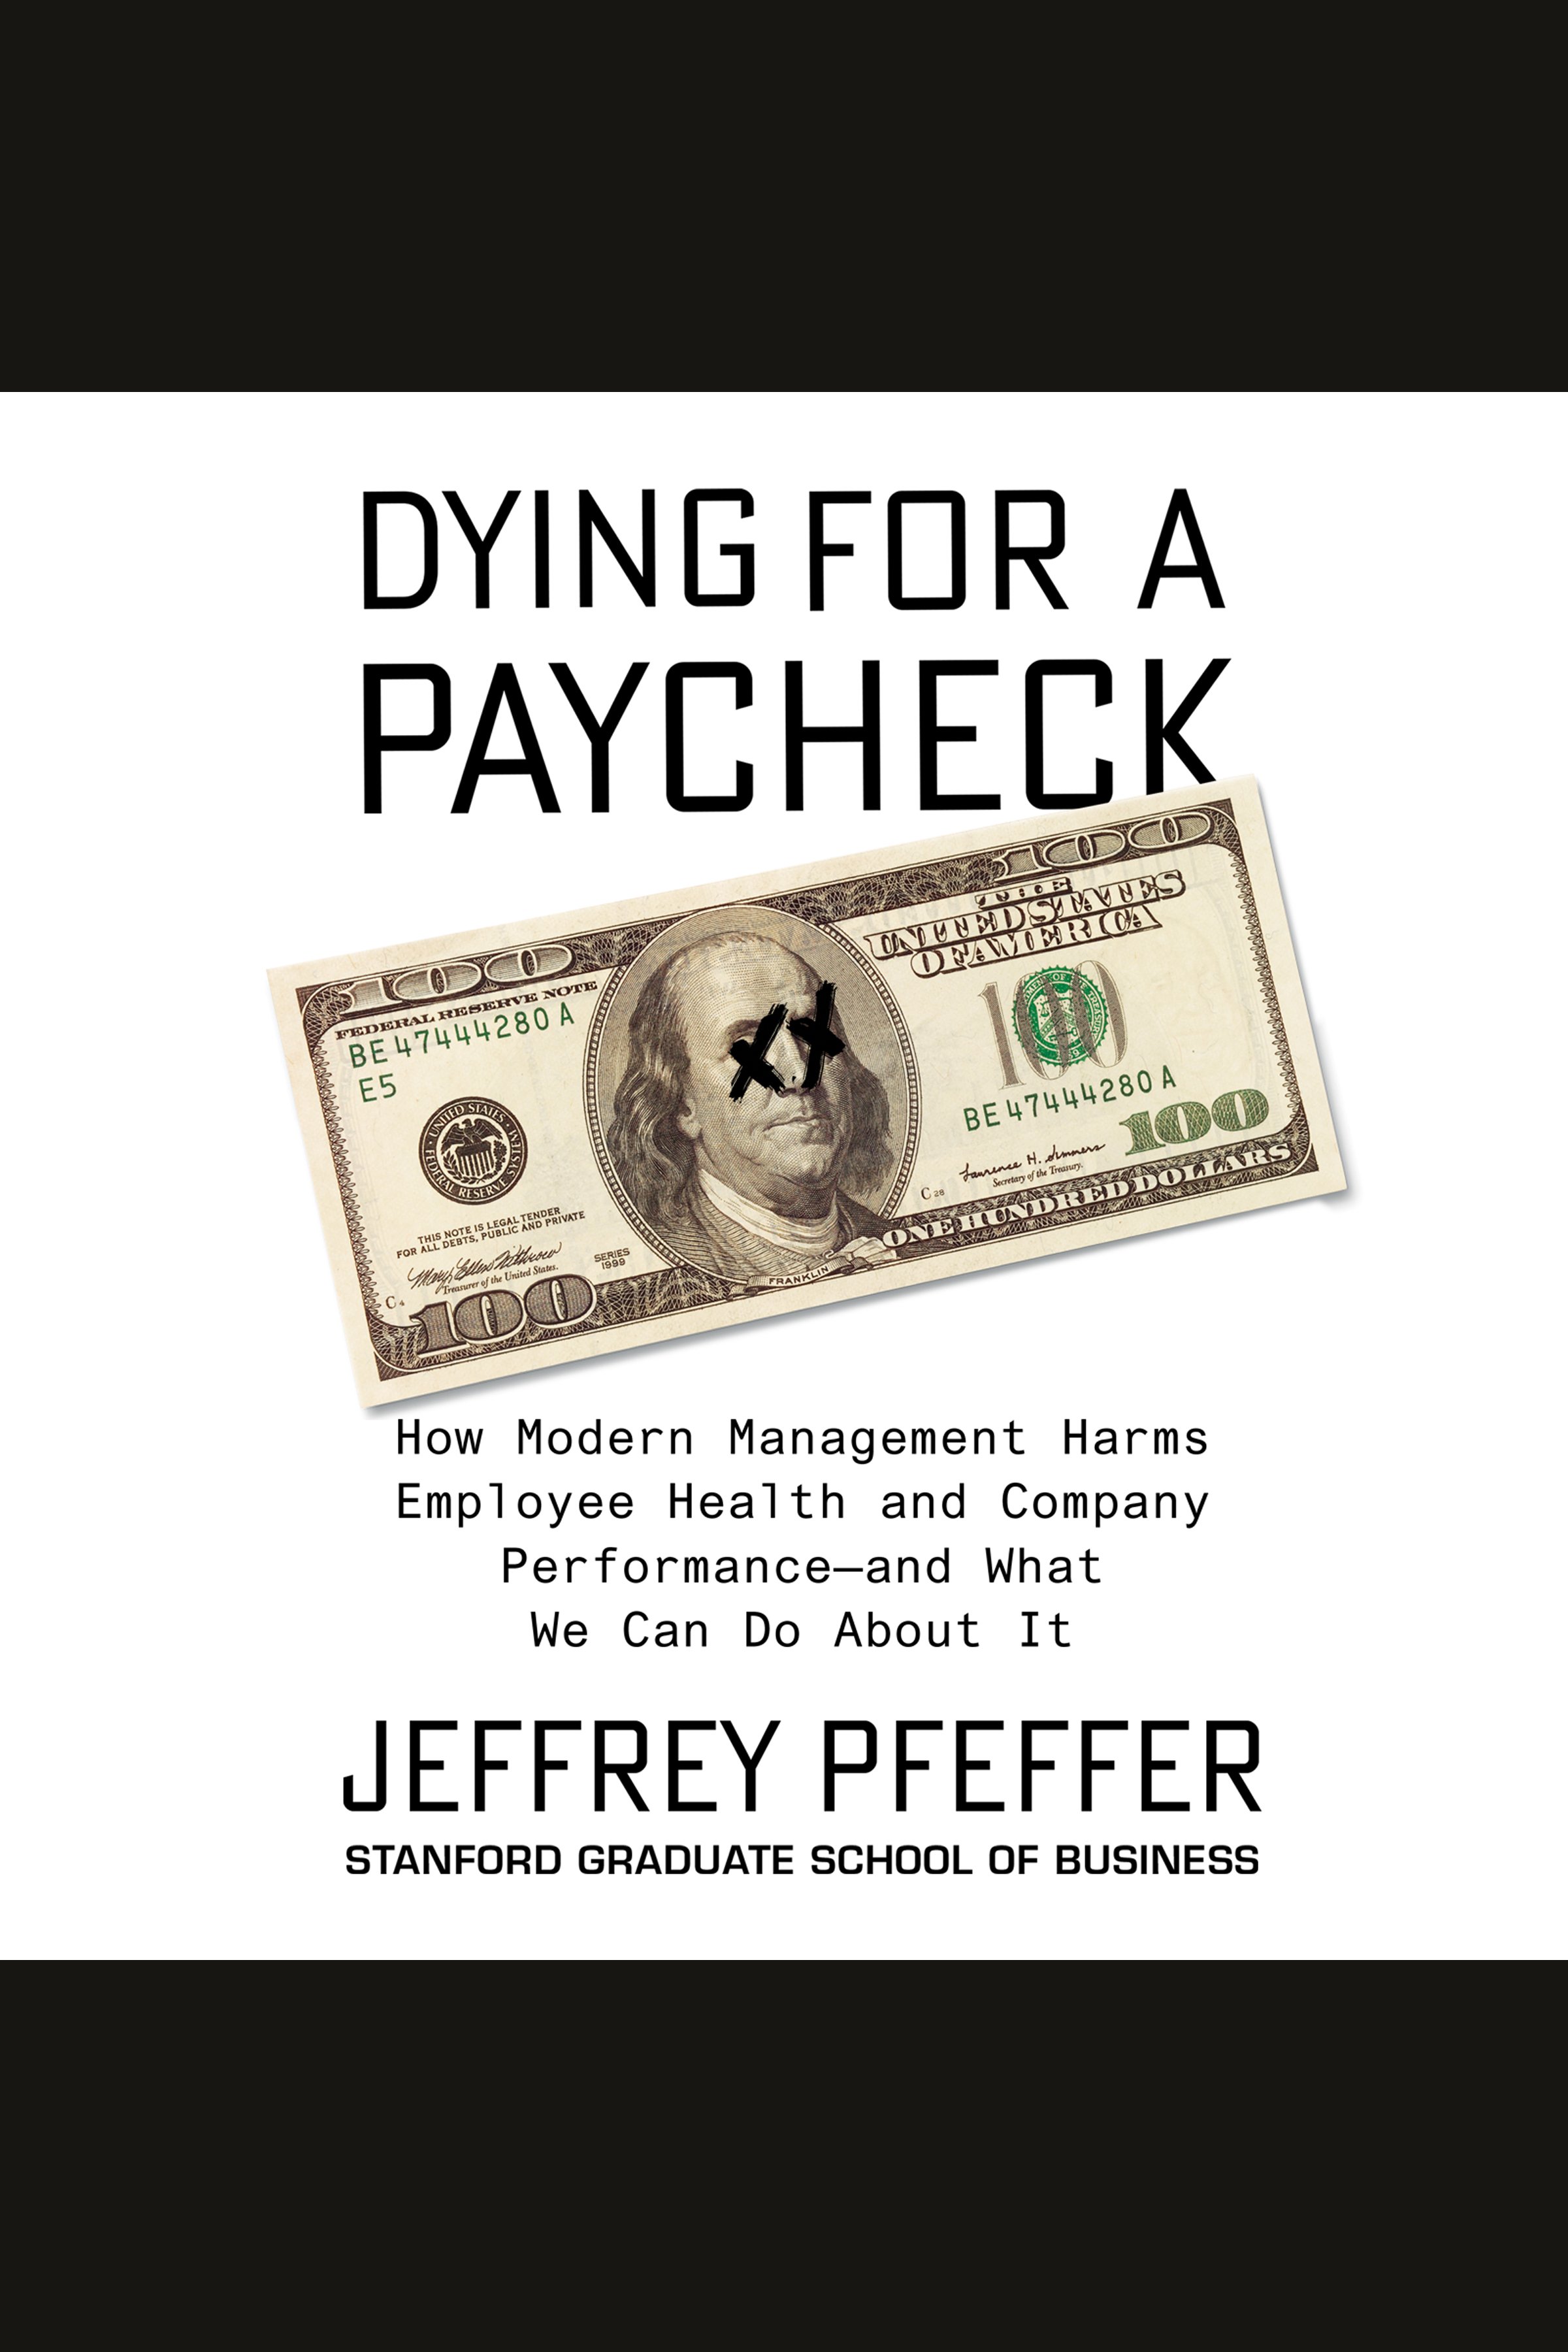 Dying for a Paycheck How Modern Management Harms Employee Health and Company PerformanceÇand What We Can Do About It cover image